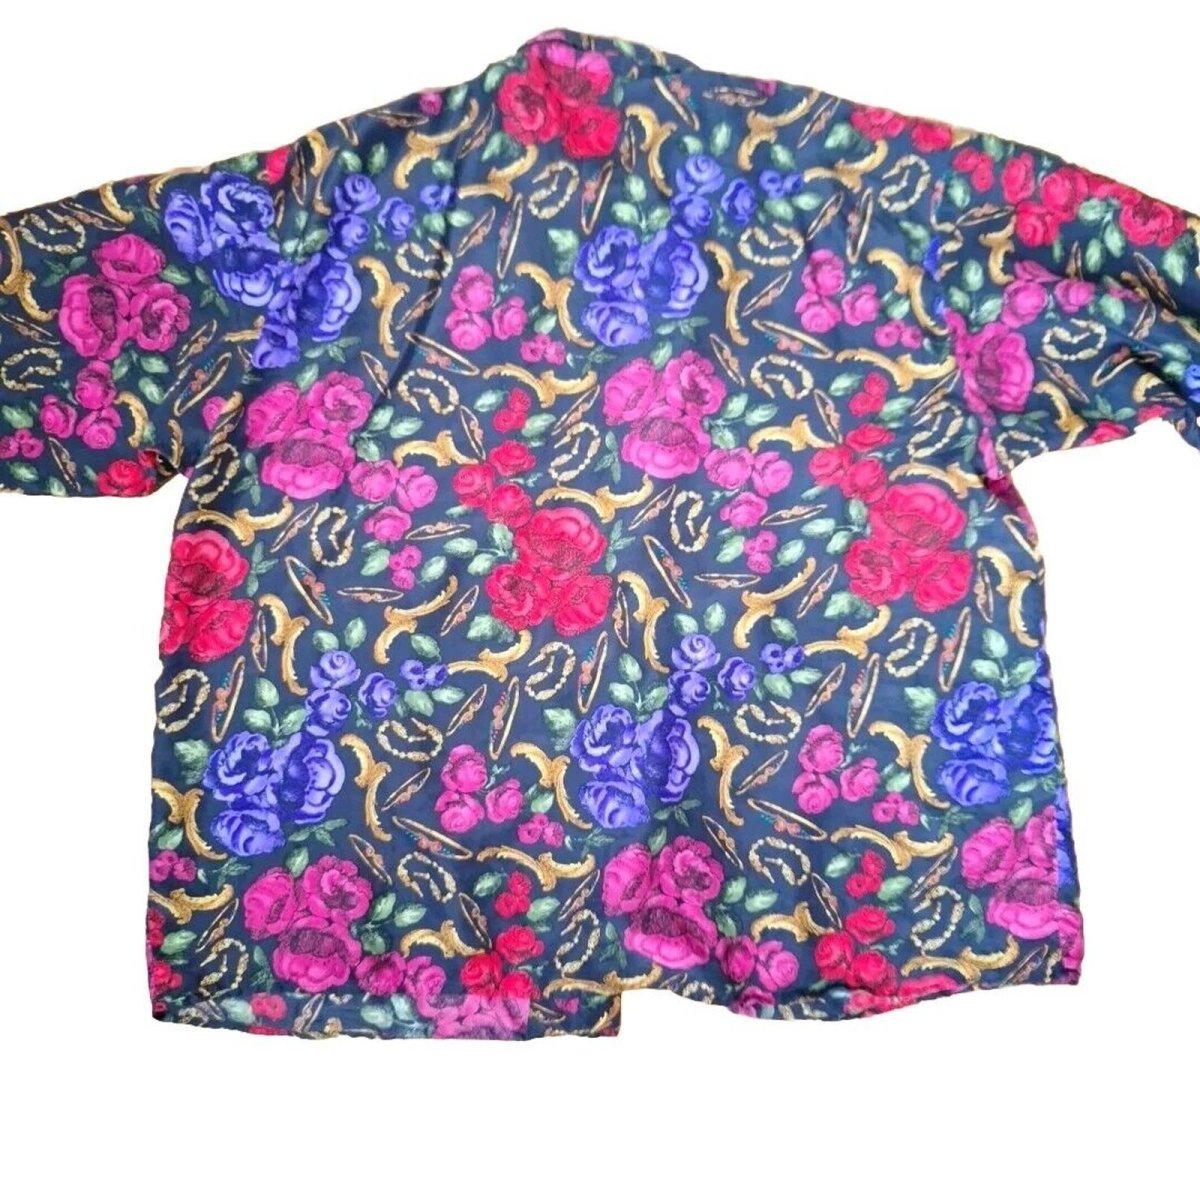 Vintage 80s/90s All Silk Blouse with Floral and Gold Leaf Detail Women Plus Size 26/28 - themallvintage The Mall Vintage